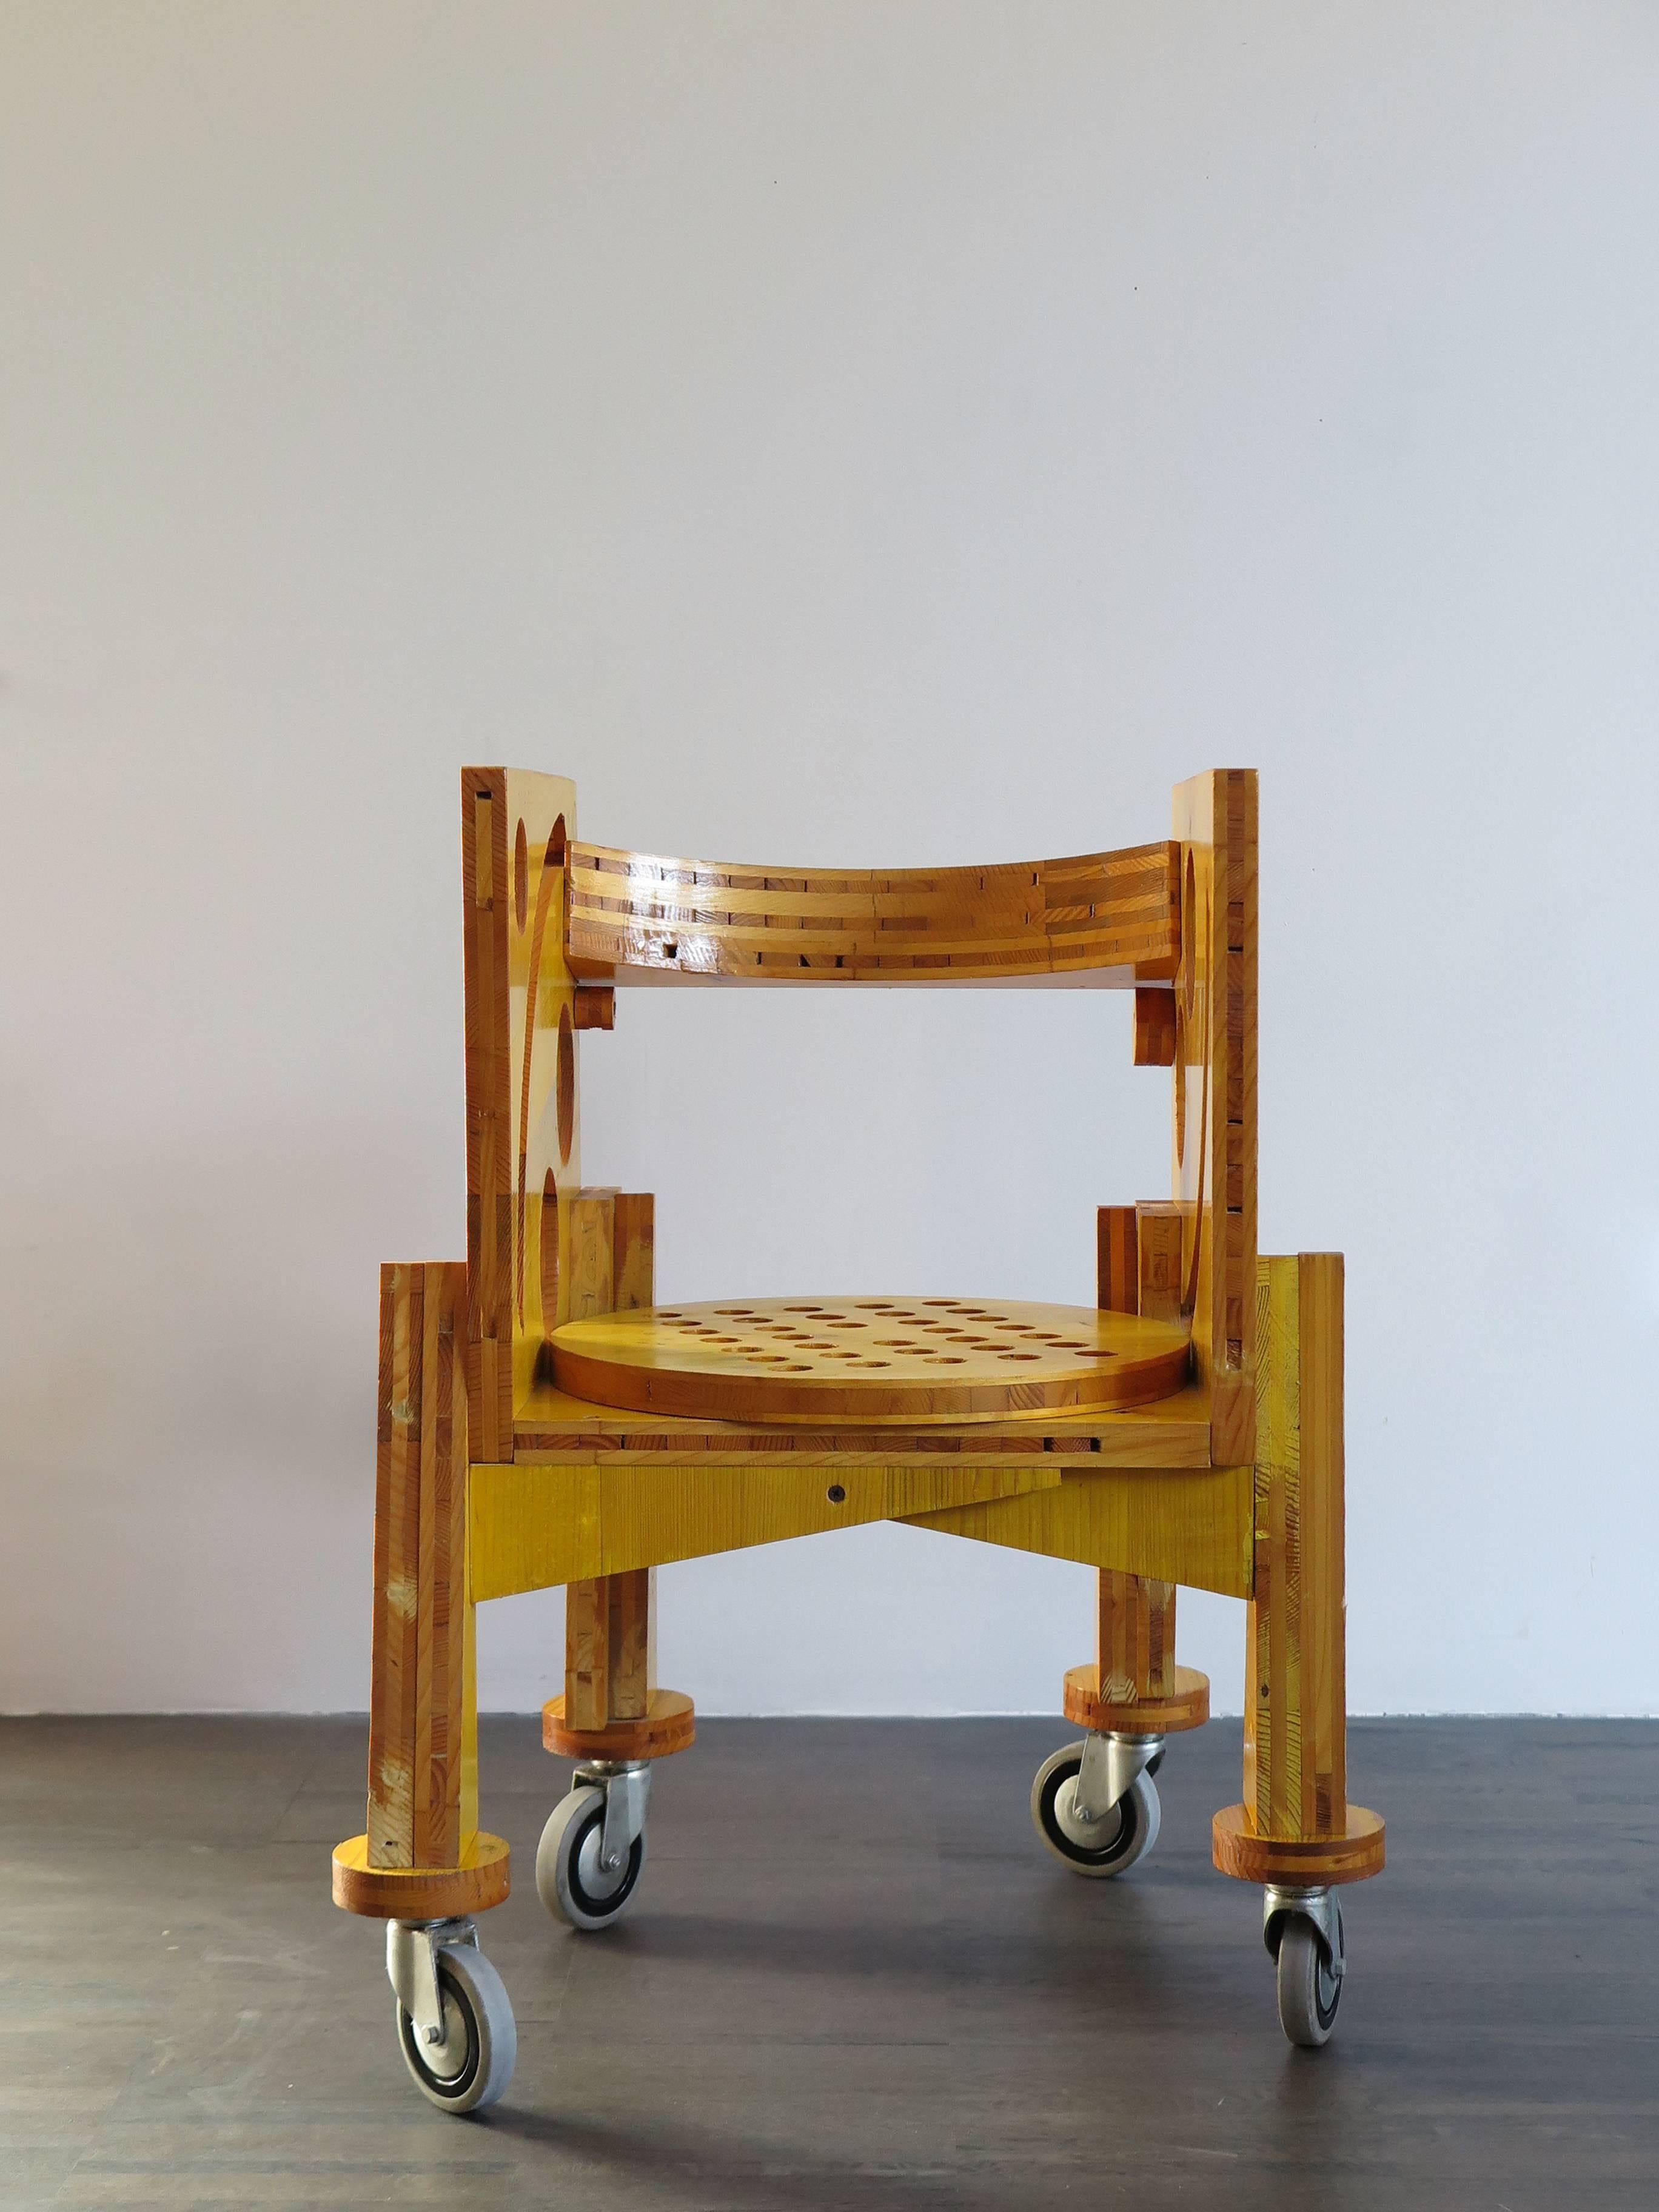 Prototype chair designed by Italian artist Cesare Leonardi in 1993 and realizated with formwork board with engraved reference number.
From the outline drawn onto a standard-sized formwork board (50 x 150 or multiples and submultiples), from the